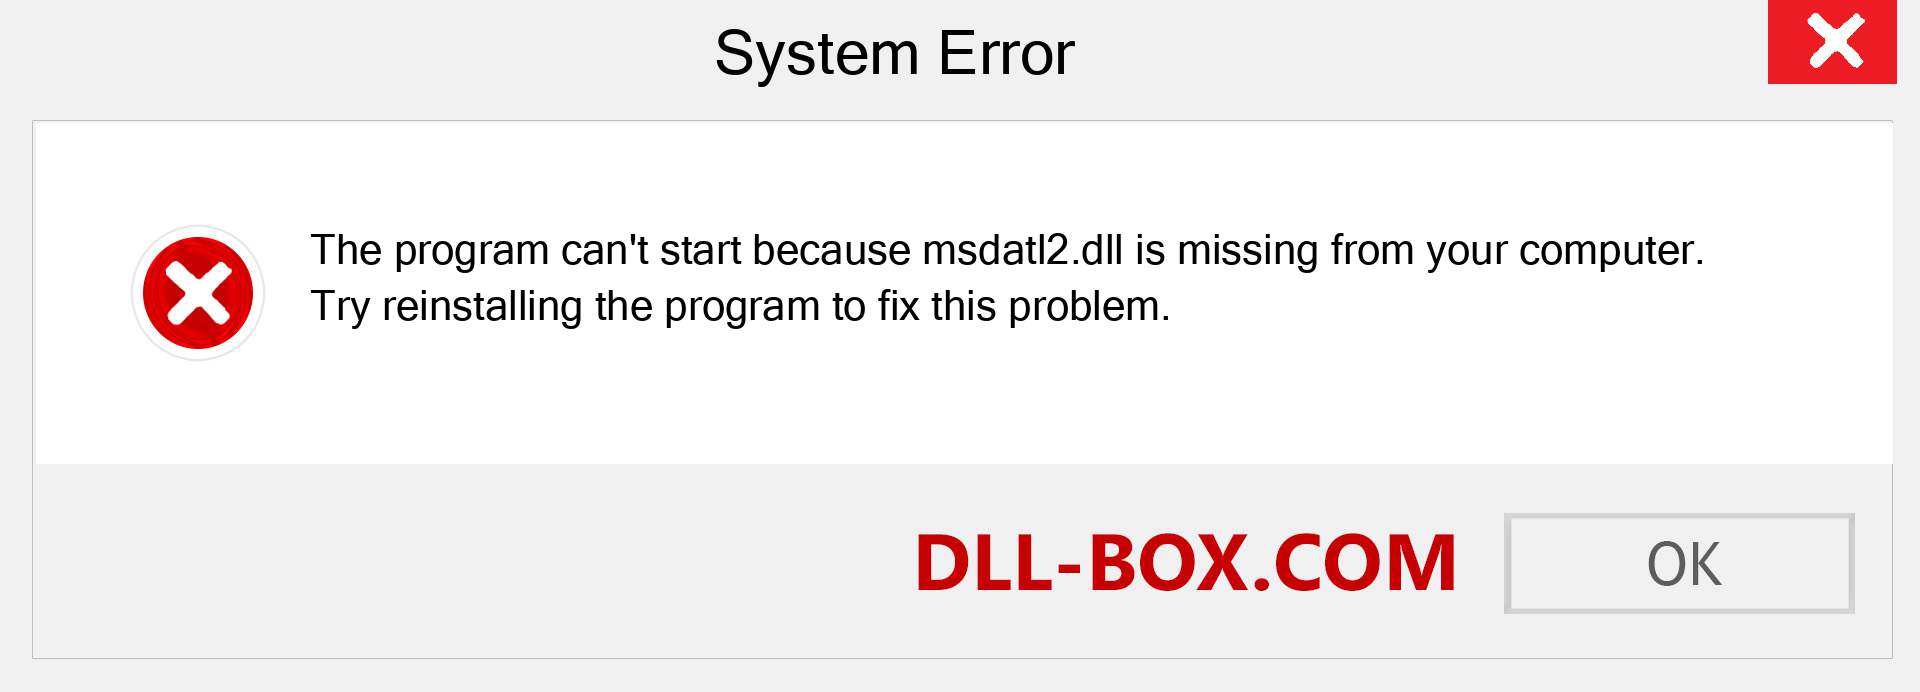  msdatl2.dll file is missing?. Download for Windows 7, 8, 10 - Fix  msdatl2 dll Missing Error on Windows, photos, images